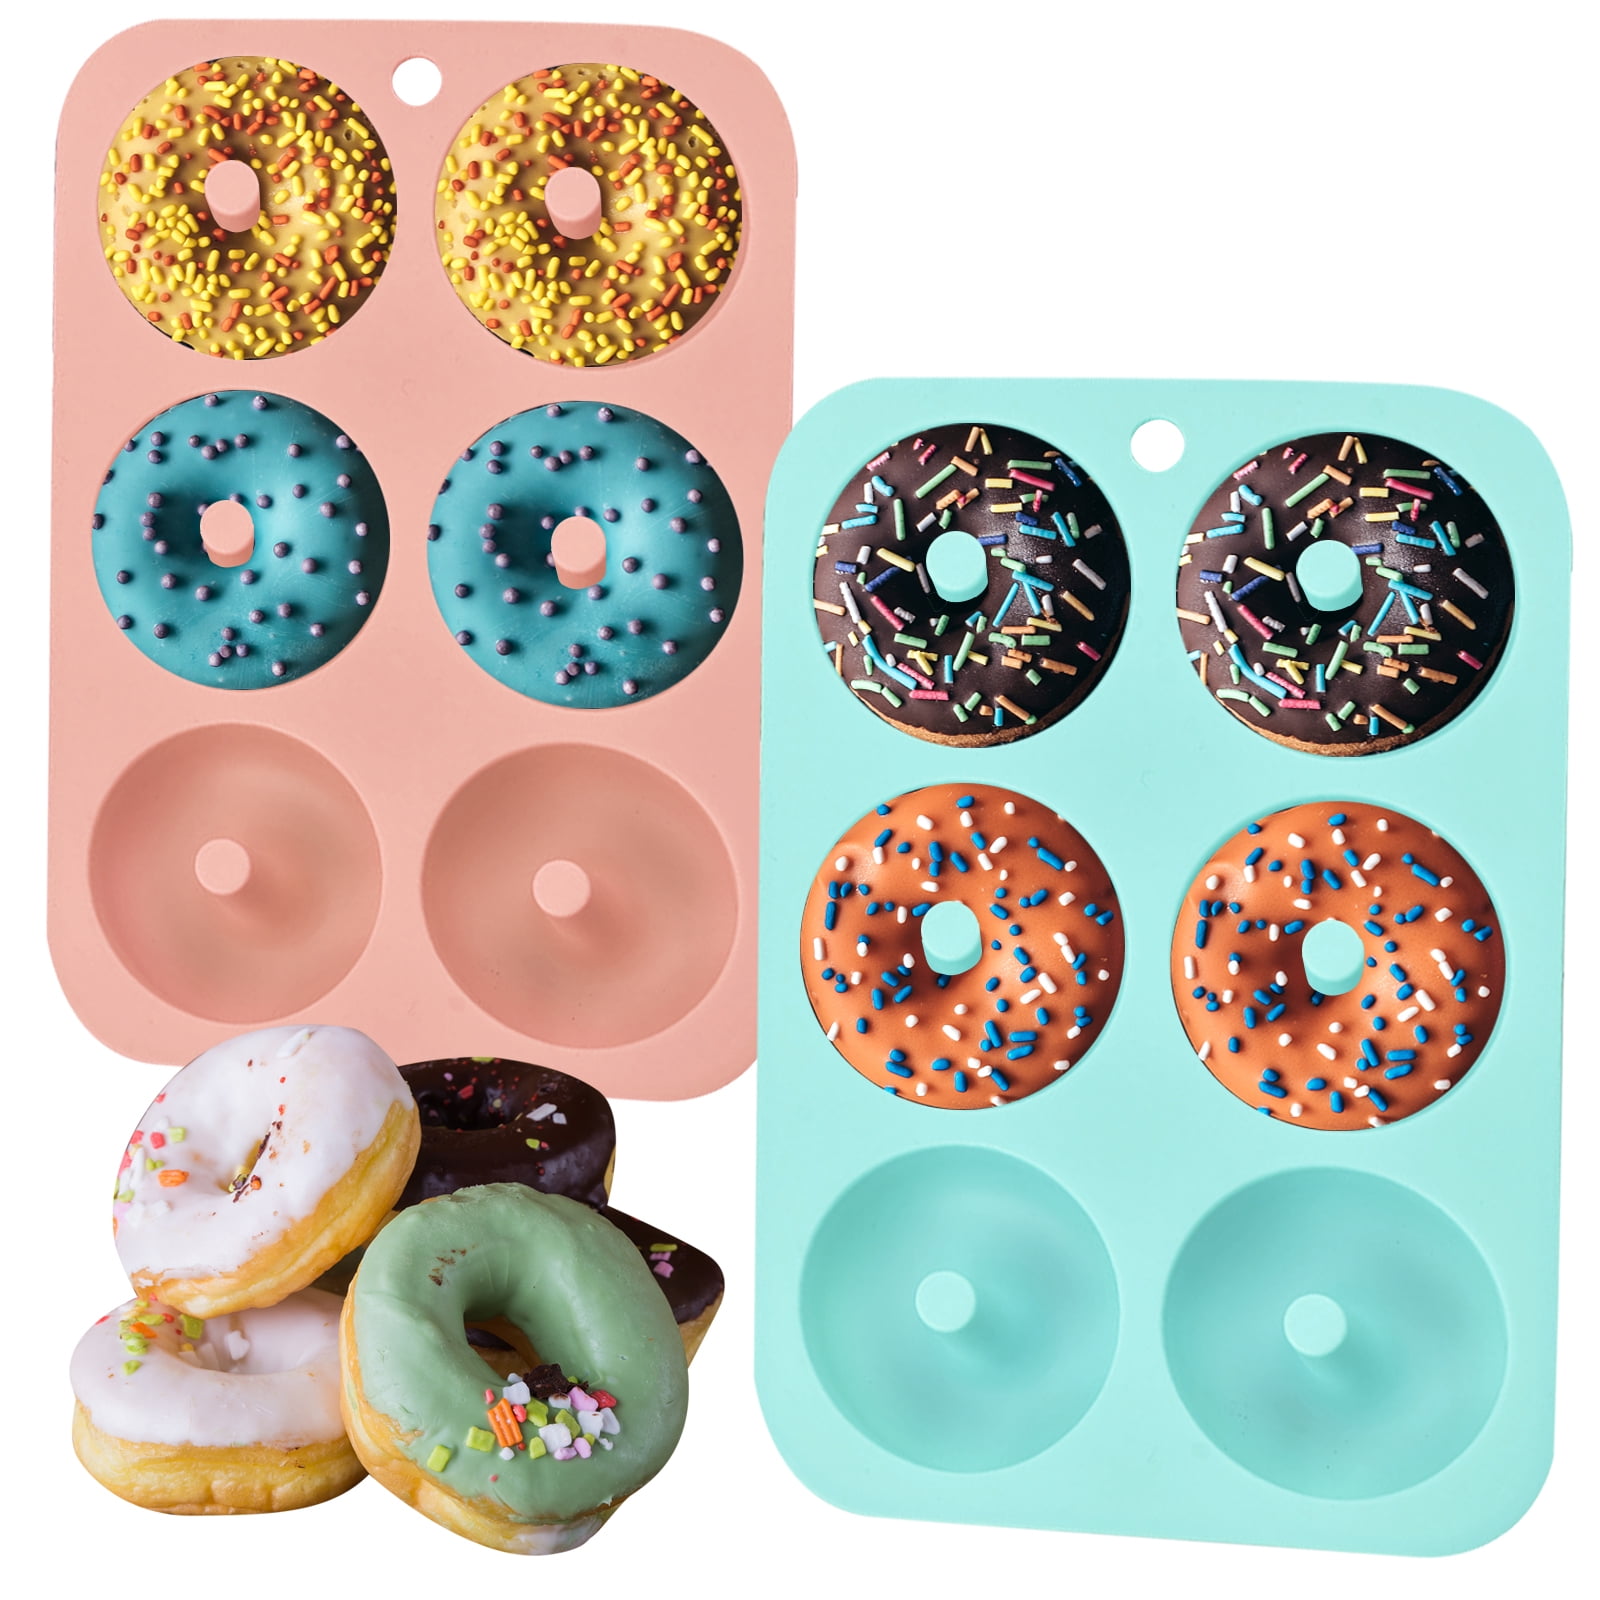 Silicone Donut Mold 6 Holes Donuts Maker Silicone Shape Utensils for Pastry  Chocolate Cake Dessert DIY Making Cake Tools - AliExpress